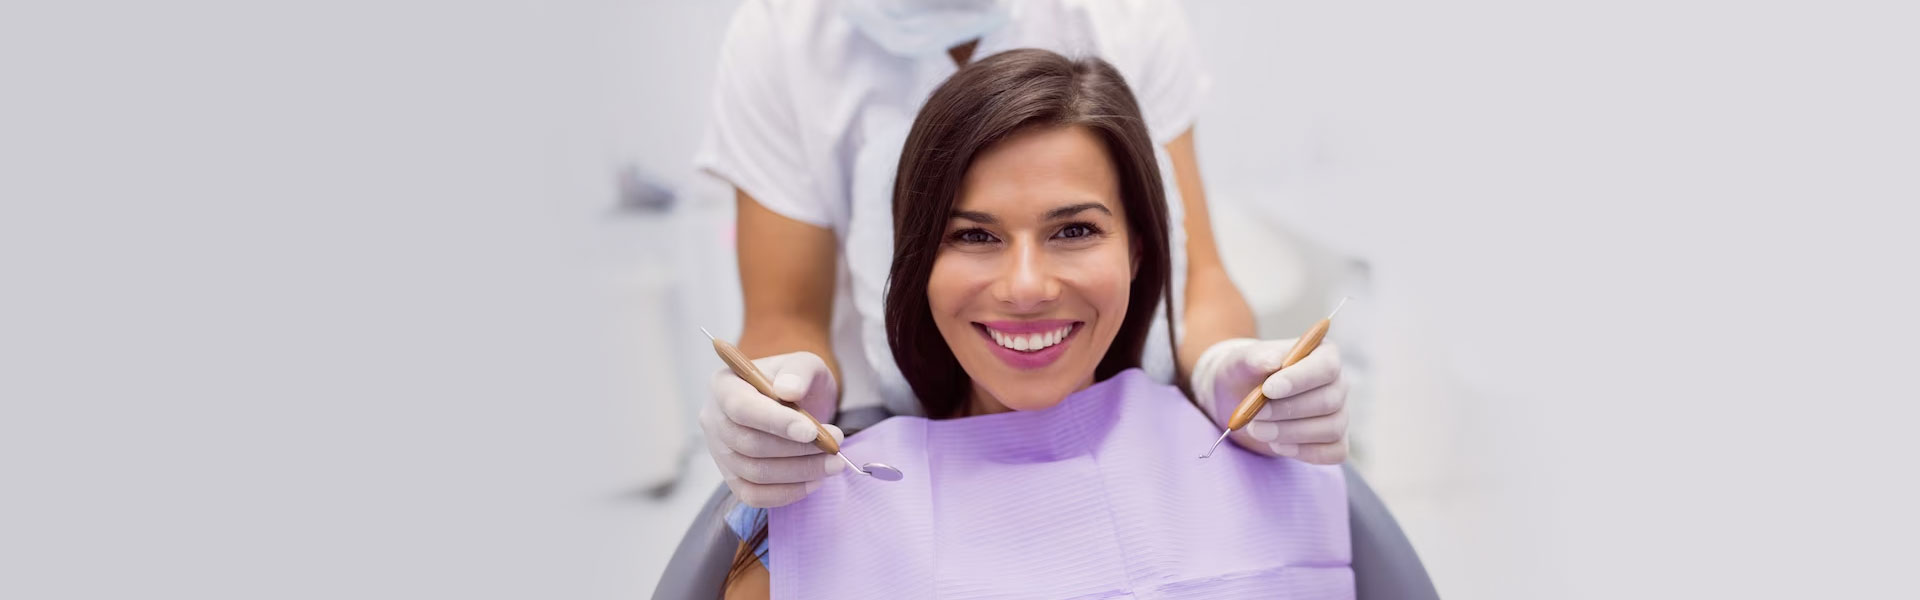 Signs It's Time for a Root Canal: Understanding When to Seek Help from an Endodontist